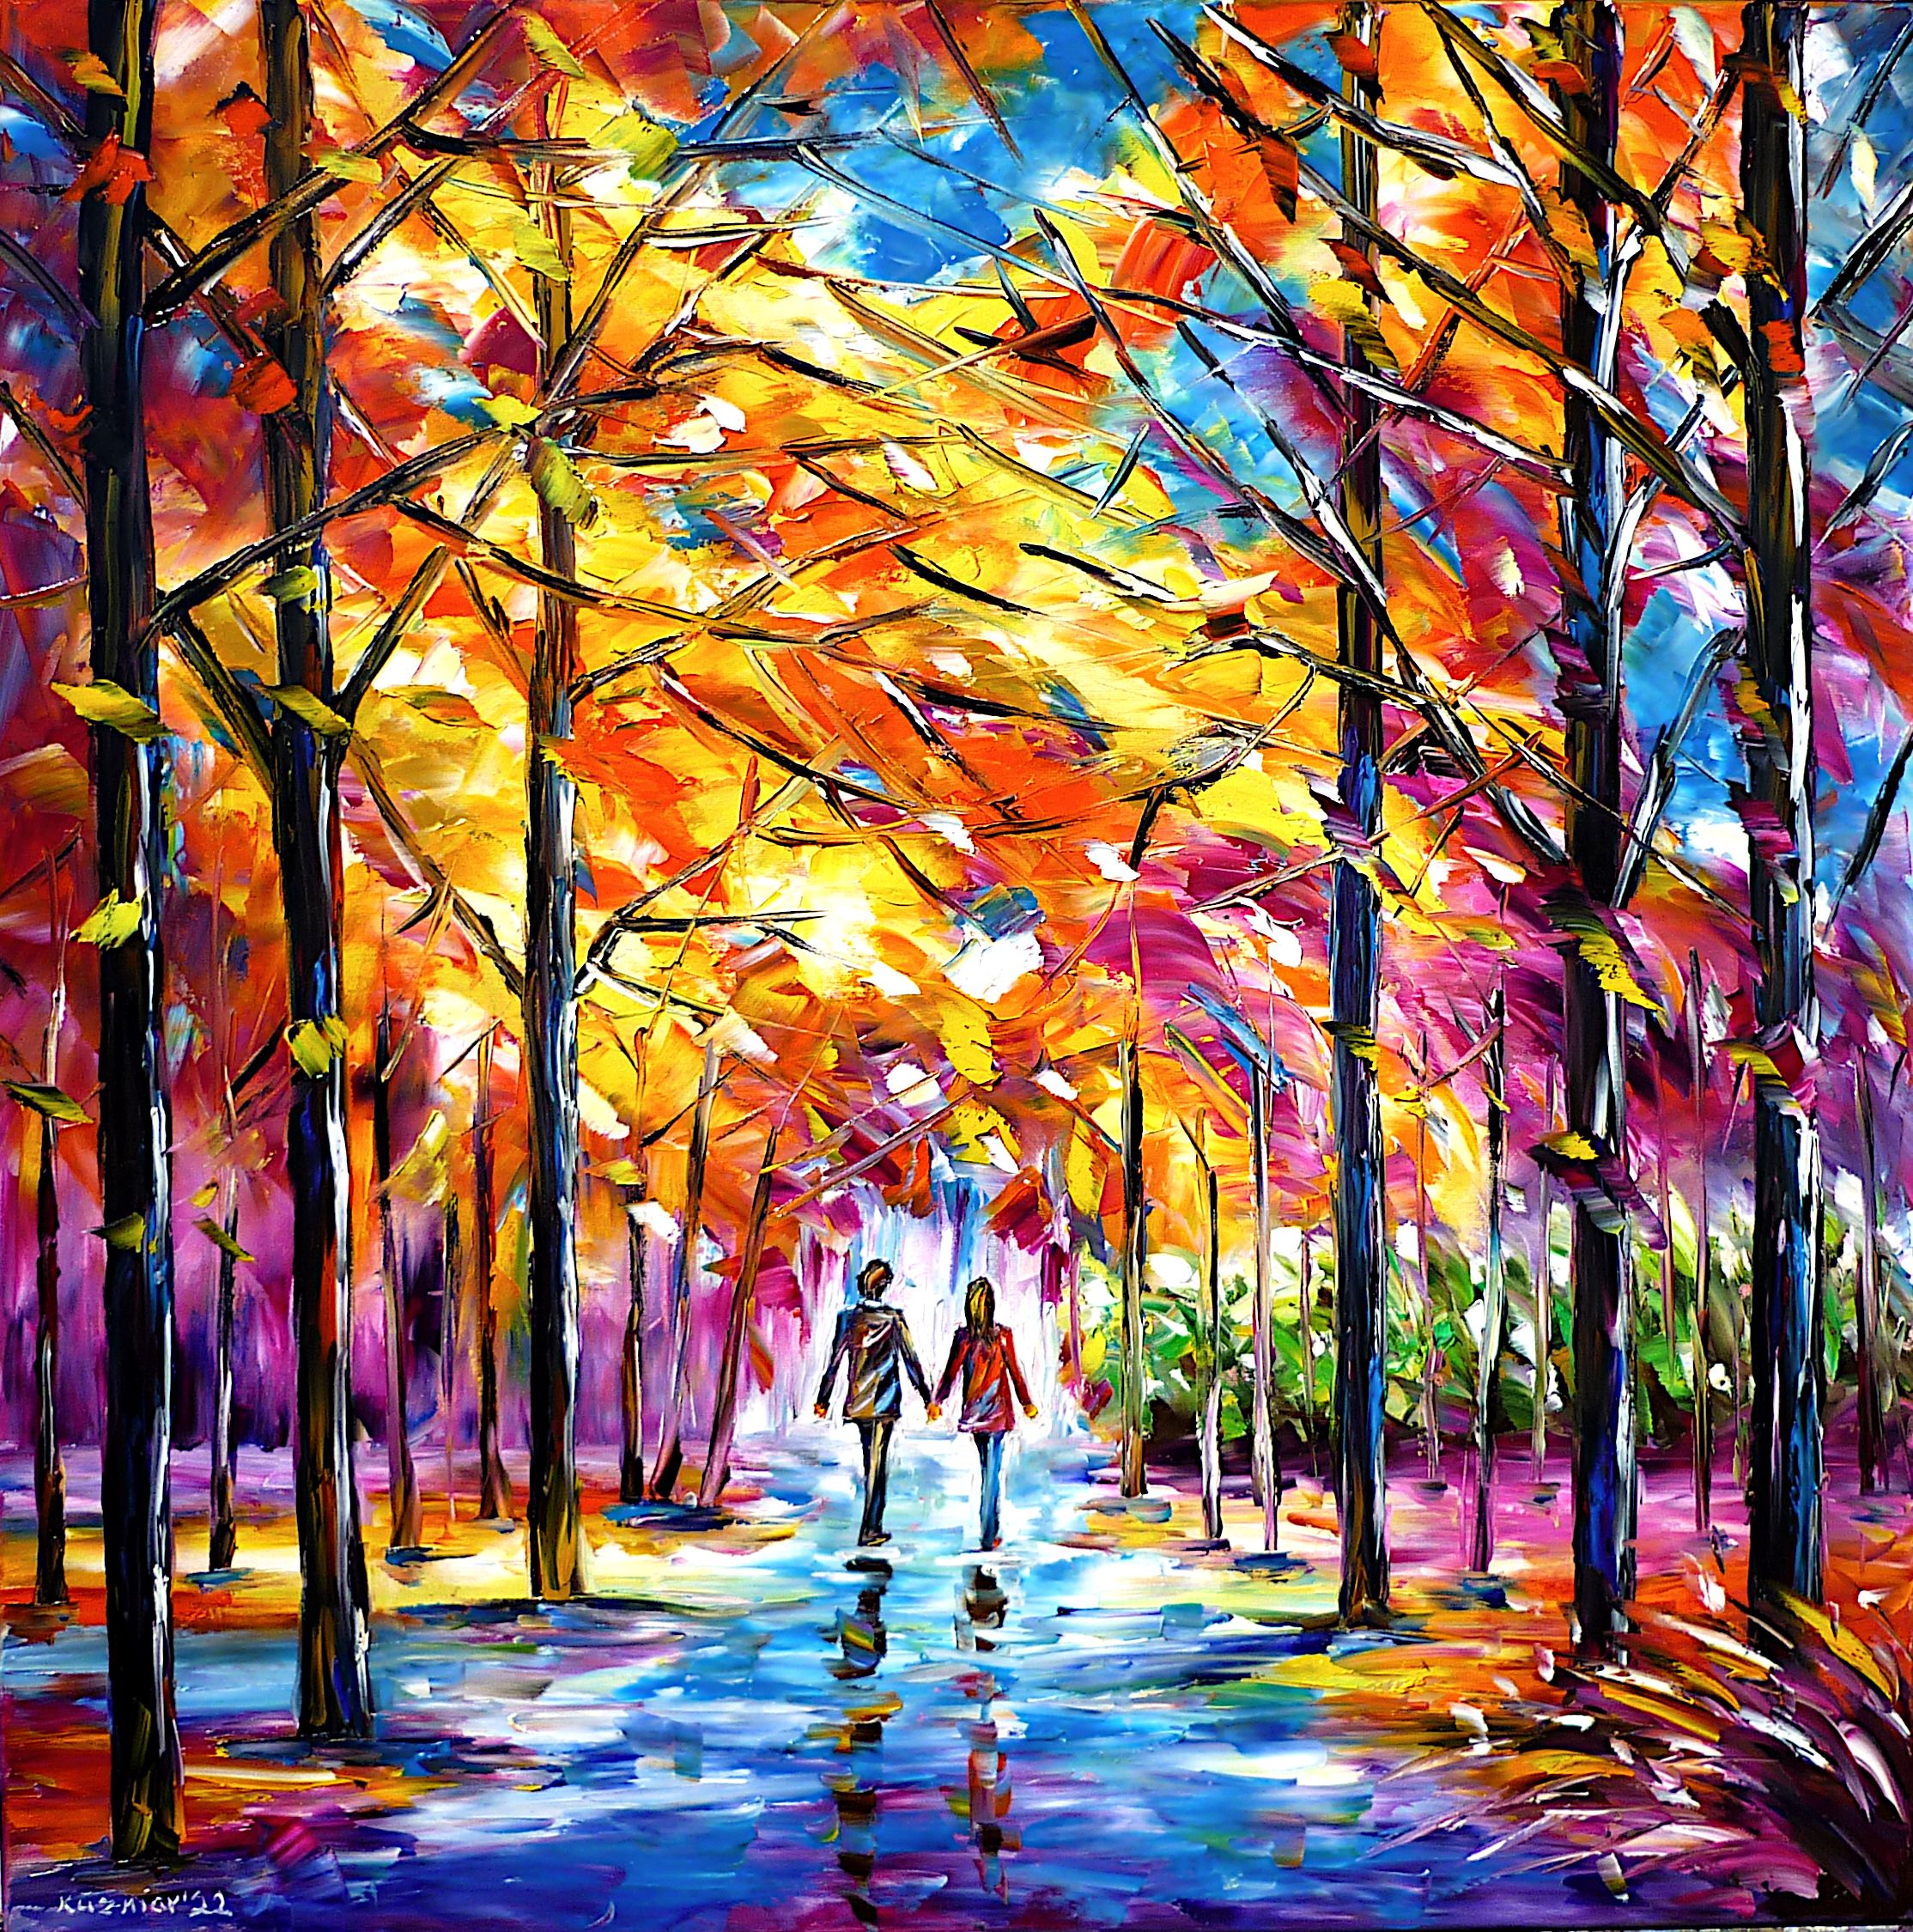 colorful autumn park,loving couple in autumn,lovers in autumn,autumn walk,park walk,people in love,lovers in the park,walking in the park,hand in hand,holding hands,love,autumn mood,romantic,romantic scene,romantic day,I love you,autumn joy,people in the park,People in autumn,colourful,mood,autumn lovers,I love autumn,park landscape,autumn landscape,autumn trees,colorful autumn,lively autumn,autumn colors,autumn painting,autumn picture,sunny autumn day,autumn abstract,red autumn,autumn leaves,autumn beauty,autumn impression,autumn light,autumn,autumn love,landscape painting,square format,square picture,square painting,pink colors,pink yellow red blue,palette knife oil painting,modern art,impressionism,abstract painting,lively colors,colorful painting,bright colors,light reflections,impasto painting,figurative